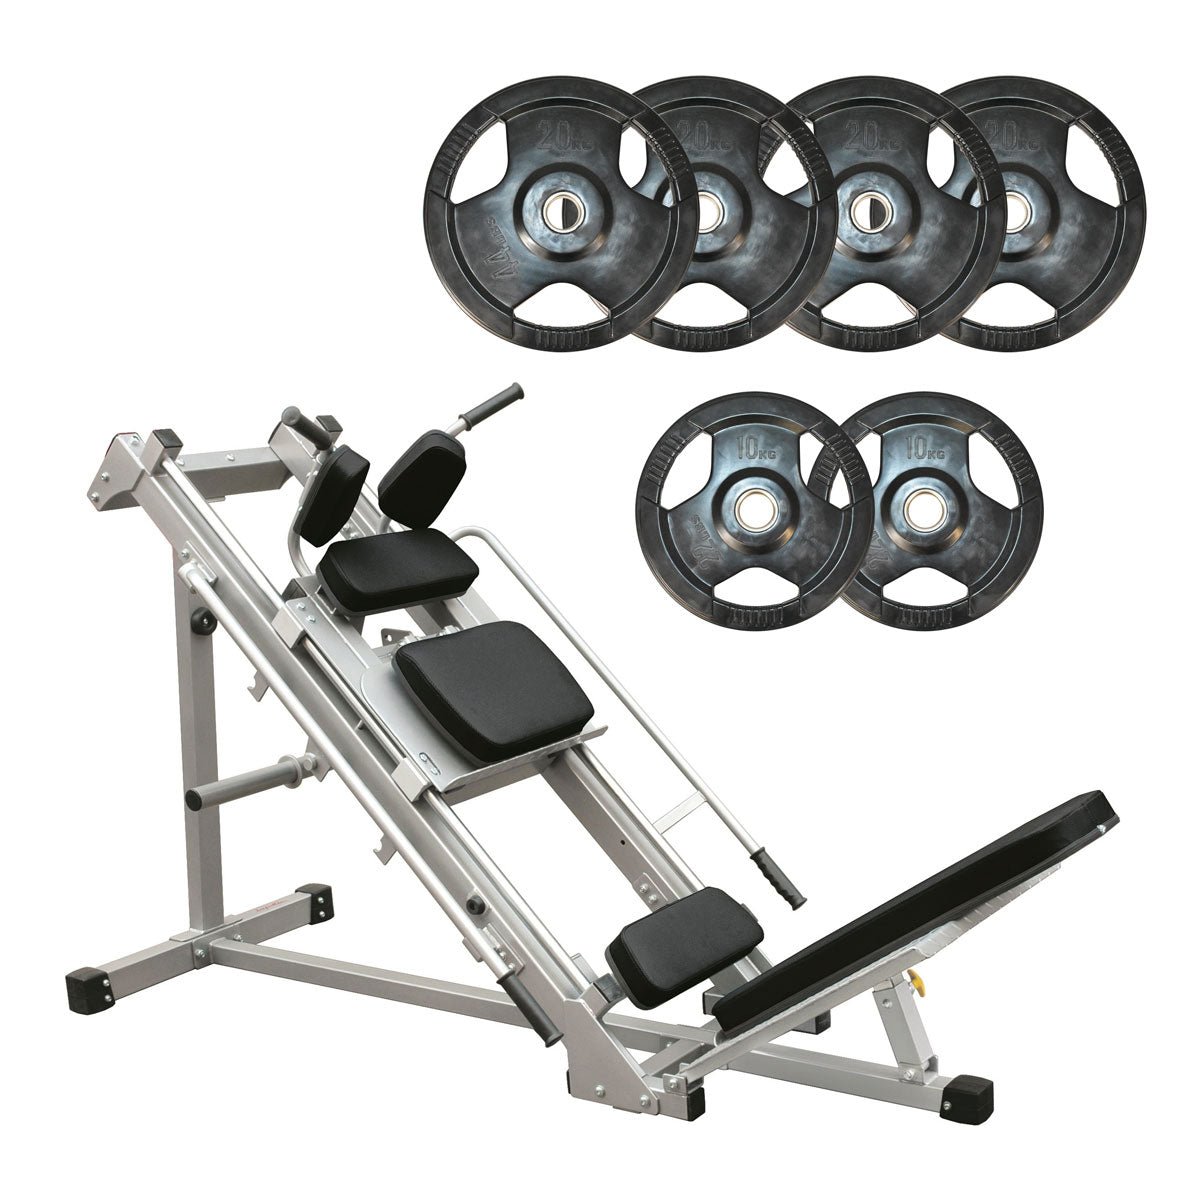 170kg Integrated Bumpers & Olympic Barbell Set